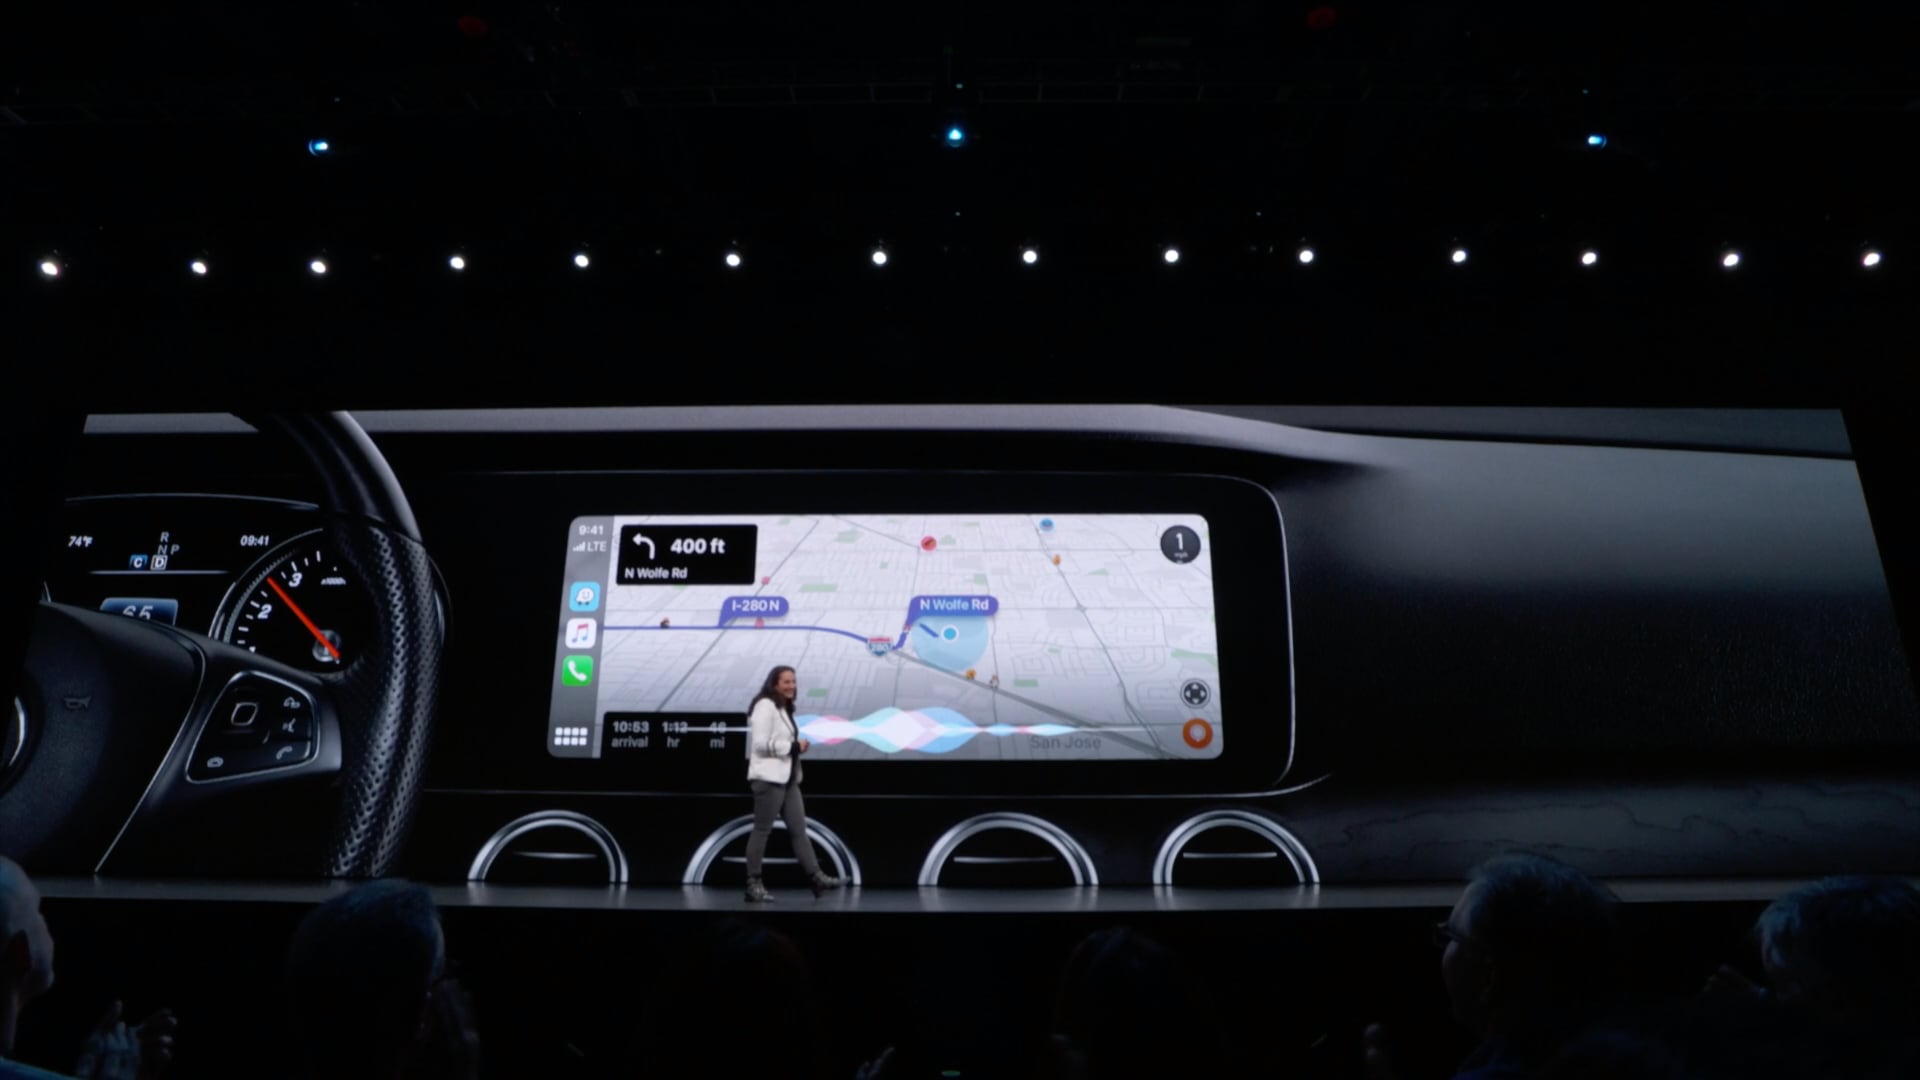 A WWDC19 slide showing CarPlay with Maps navigation and Siri